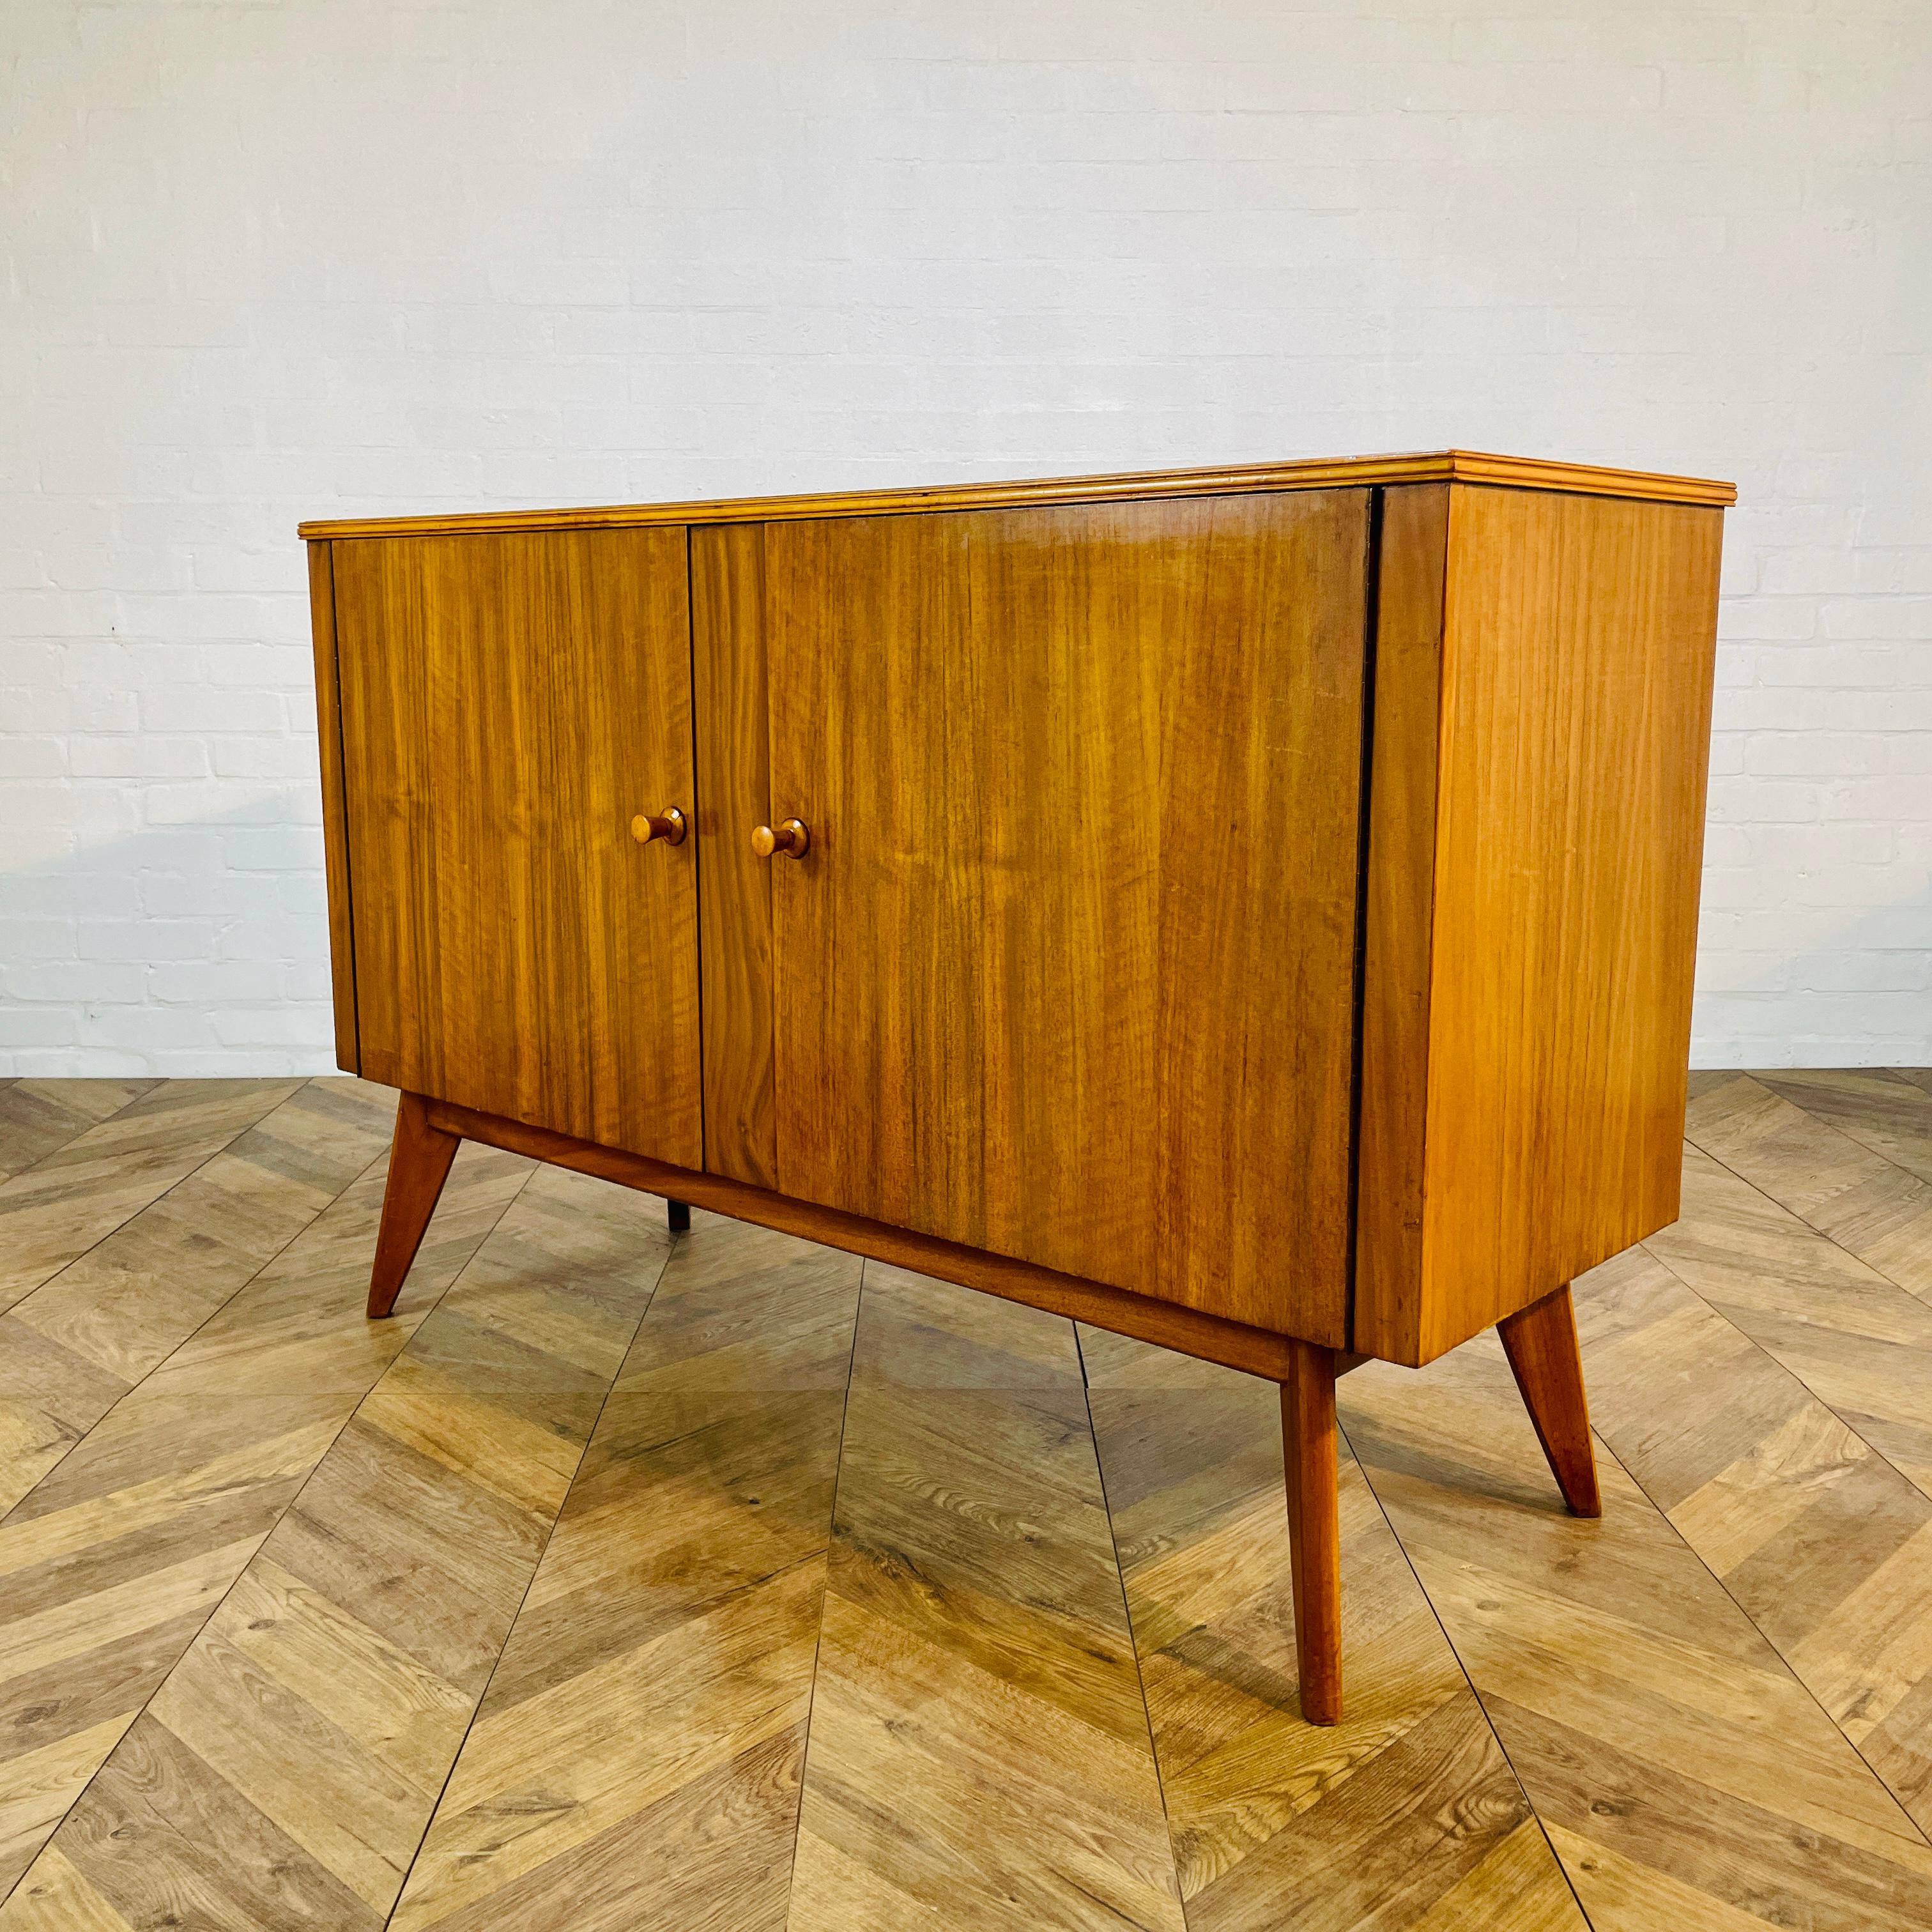 Simple, yet beautifully designed Sideboard by Neil Morris for Morris of Glasgow, circa 1960s.

The sideboard consists of two storage sections, to the left hand side there is a shelf and cutlery drawer. On the the right there is a fixed shelf.

The